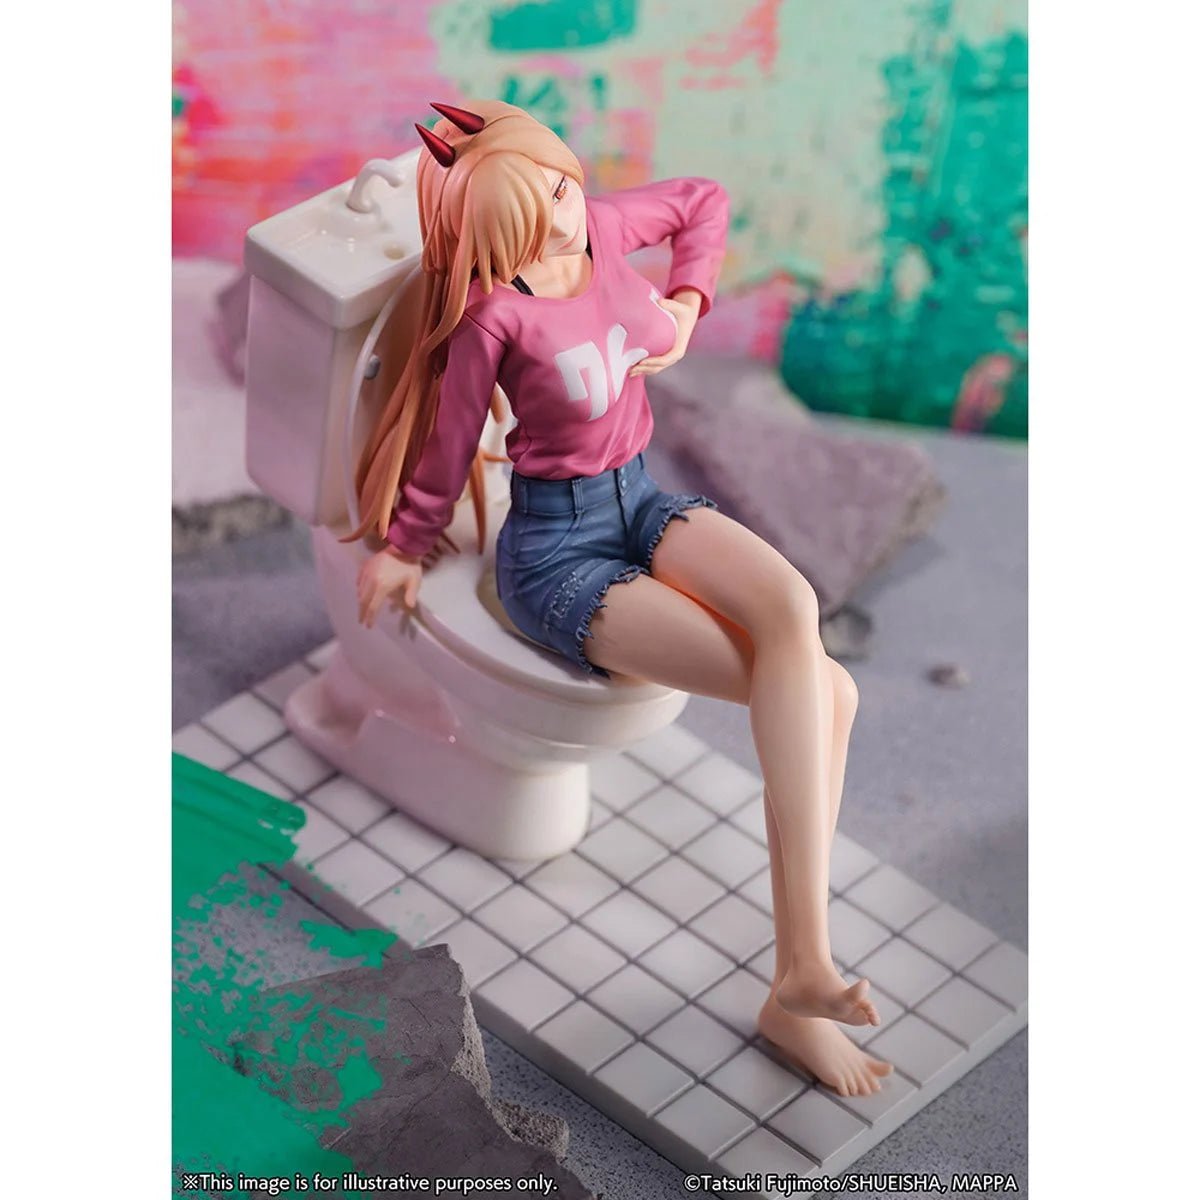 eStream - Power on Toilet 1:7 Scale Statue (Chainsaw Man) - Good Game Anime